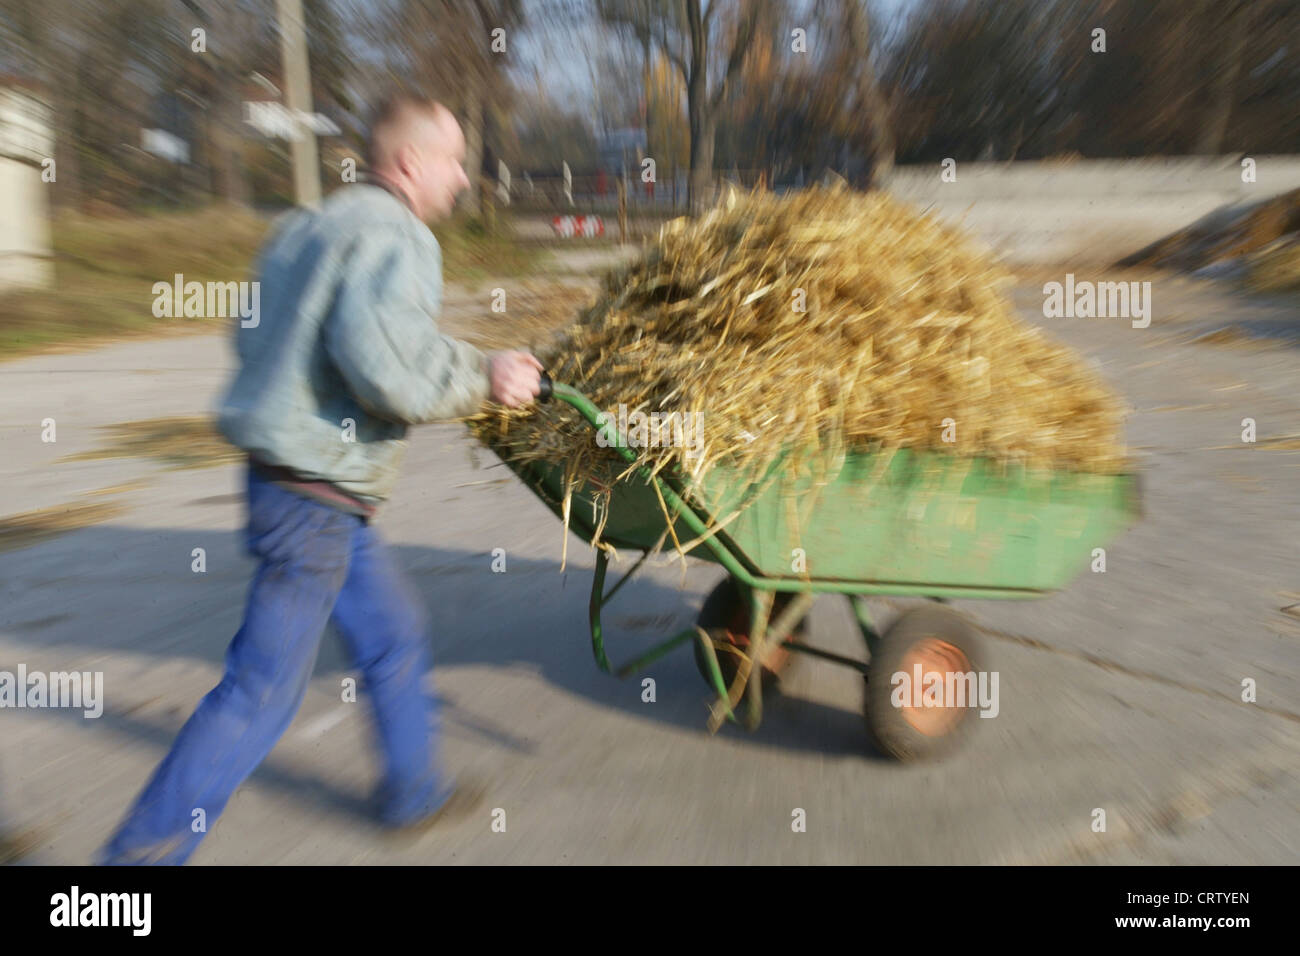 A man brings a cart dung for manure pile Stock Photo